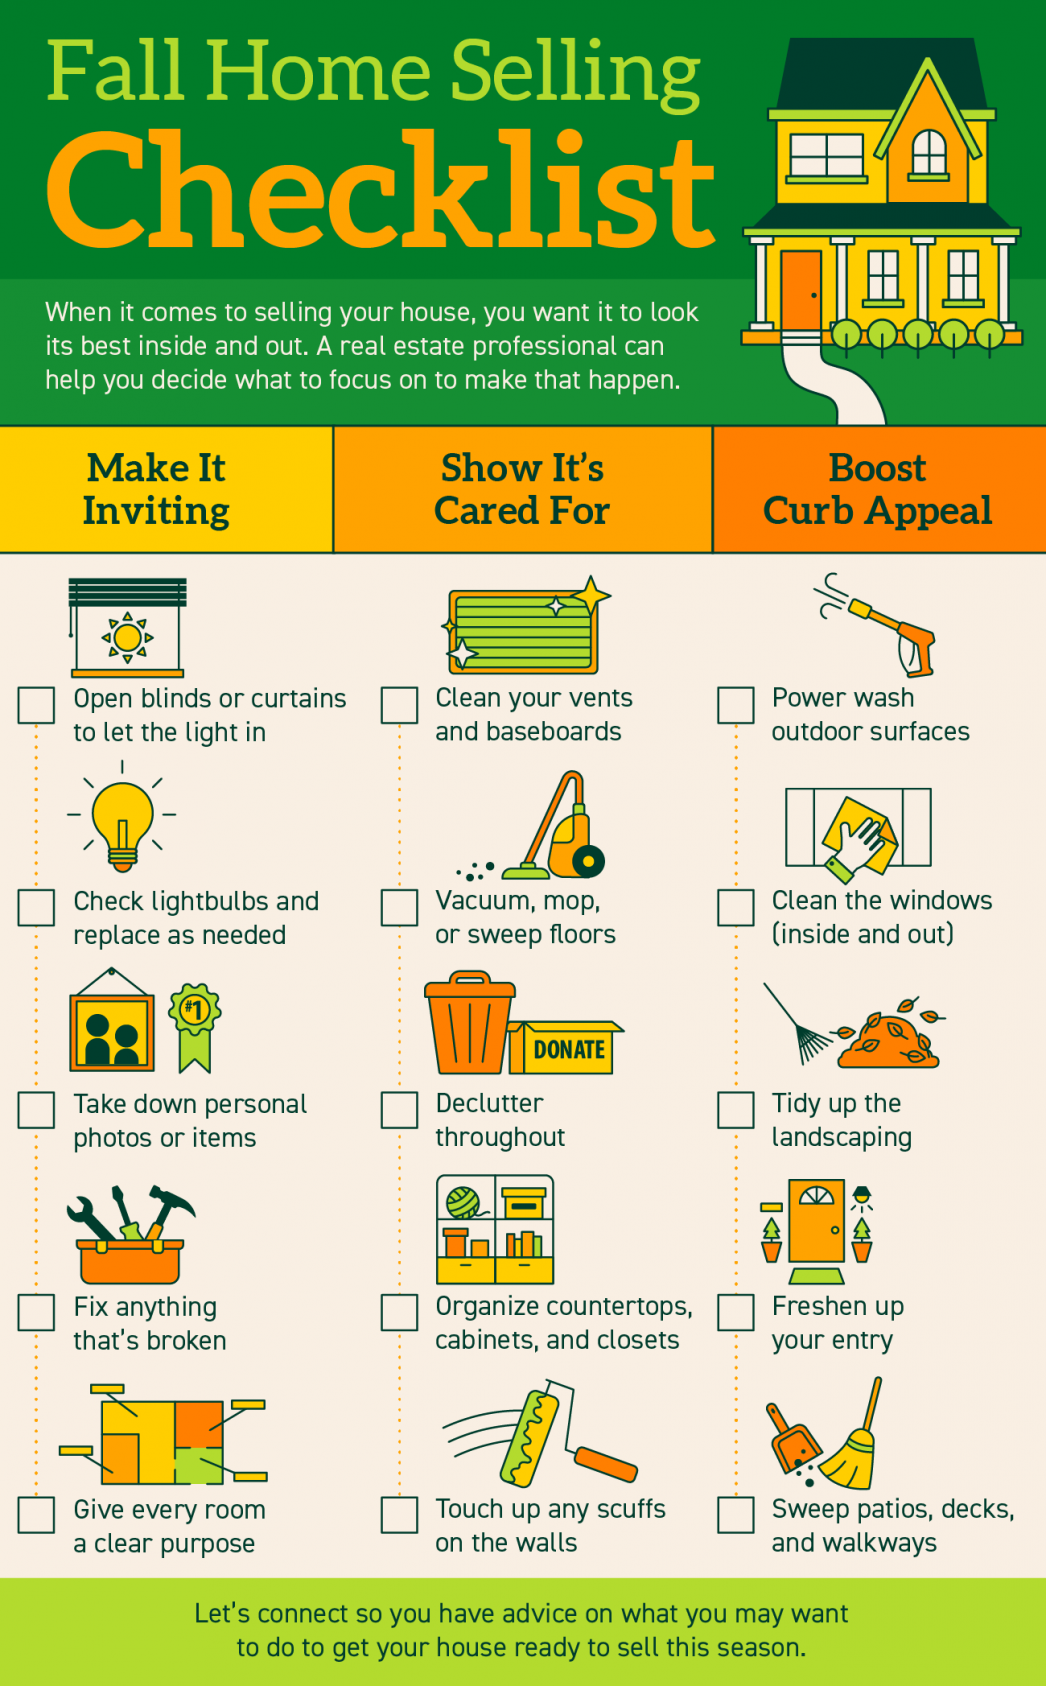 Fall Checklist for Selling Your Home